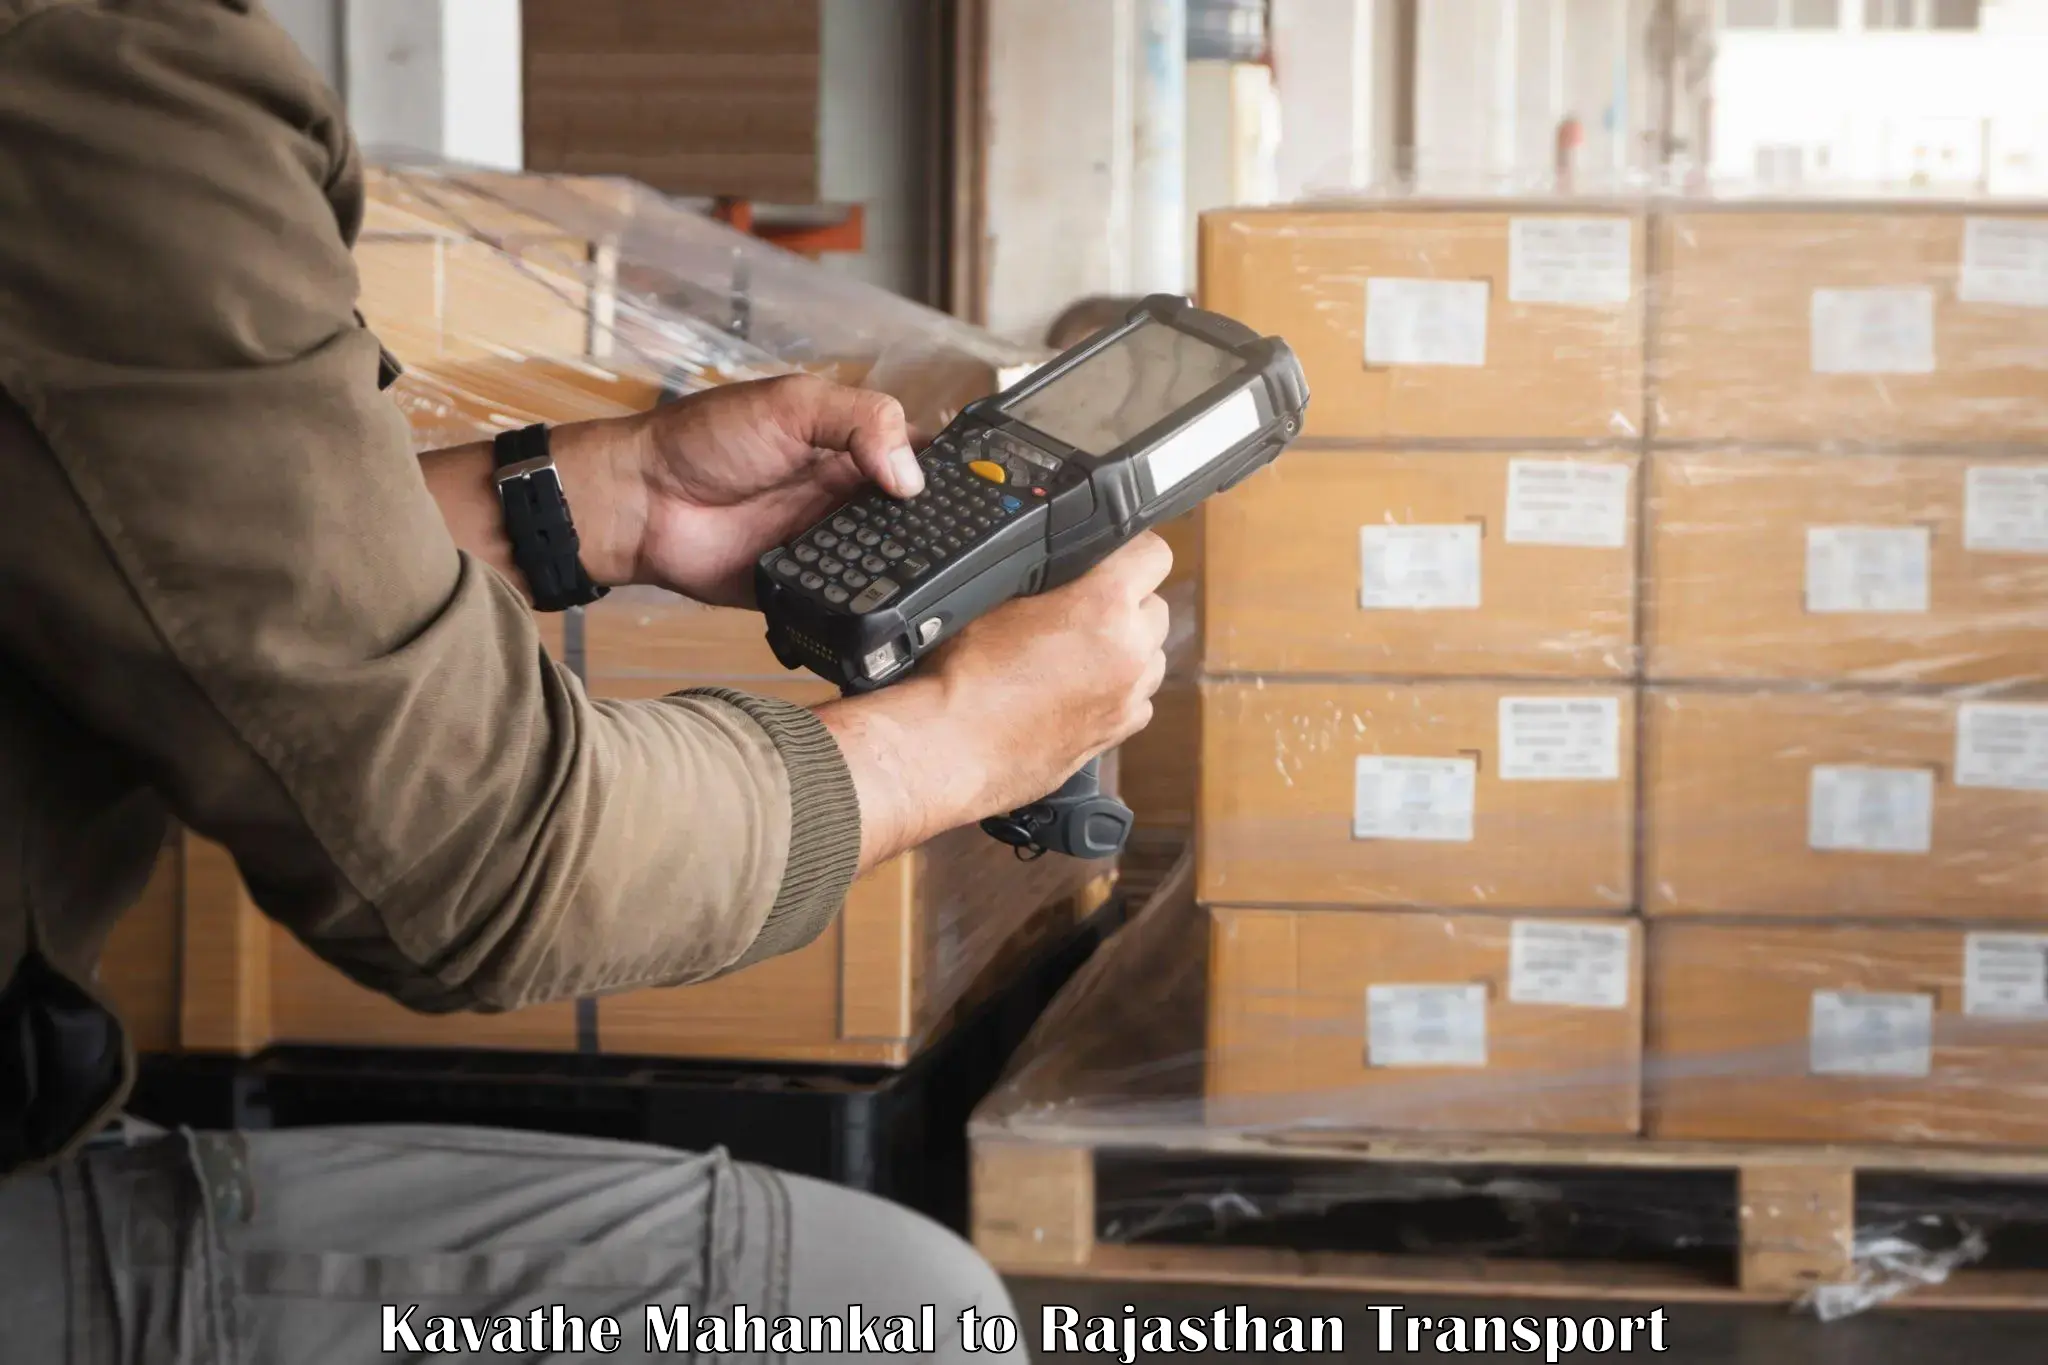 Express transport services in Kavathe Mahankal to Dholpur